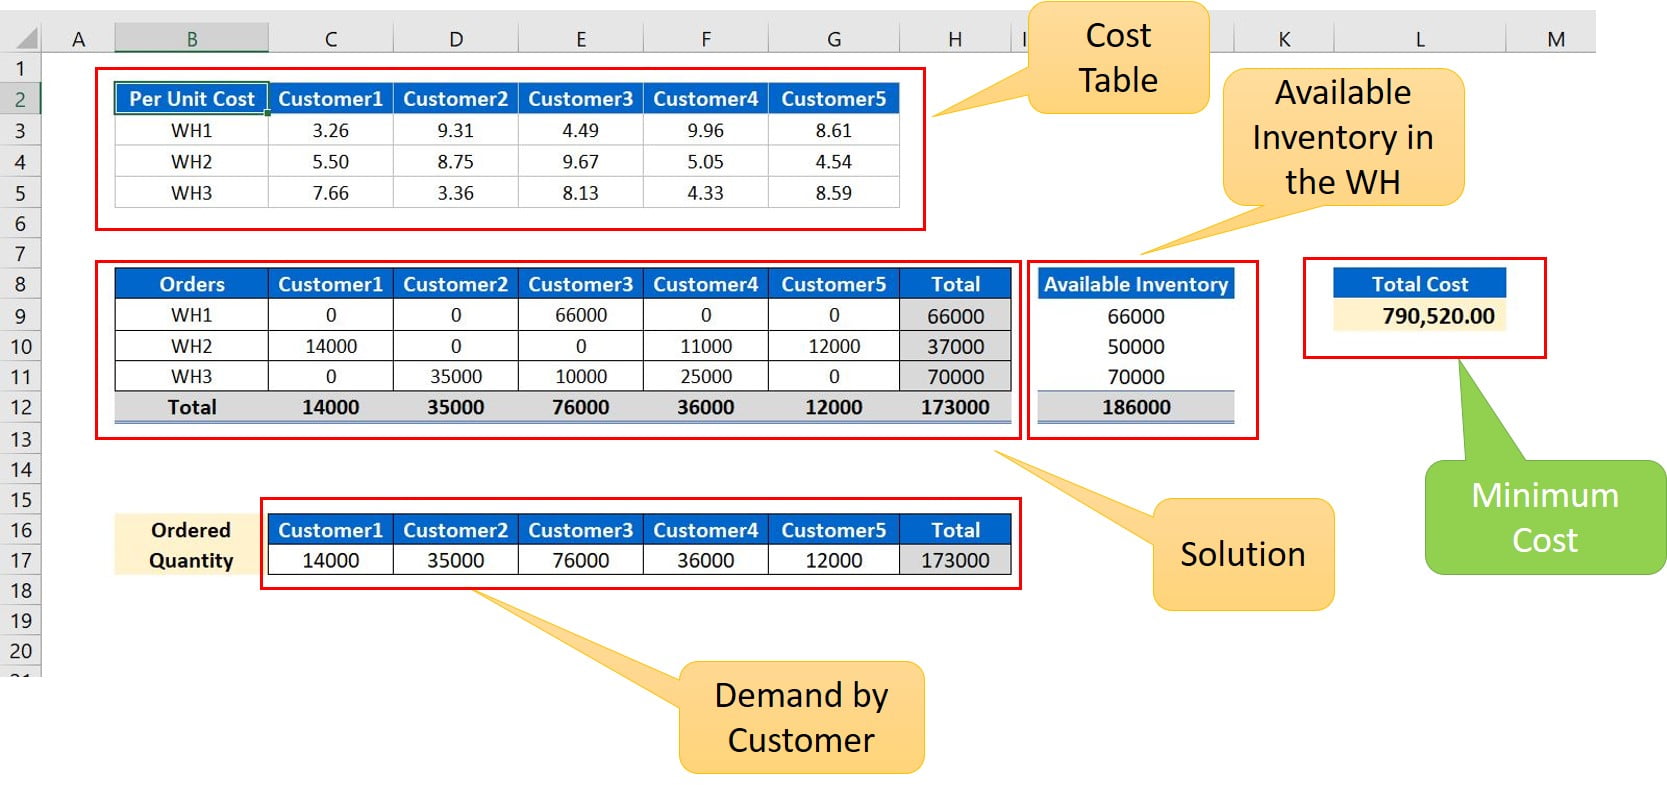 Cost Optimization Using Solver